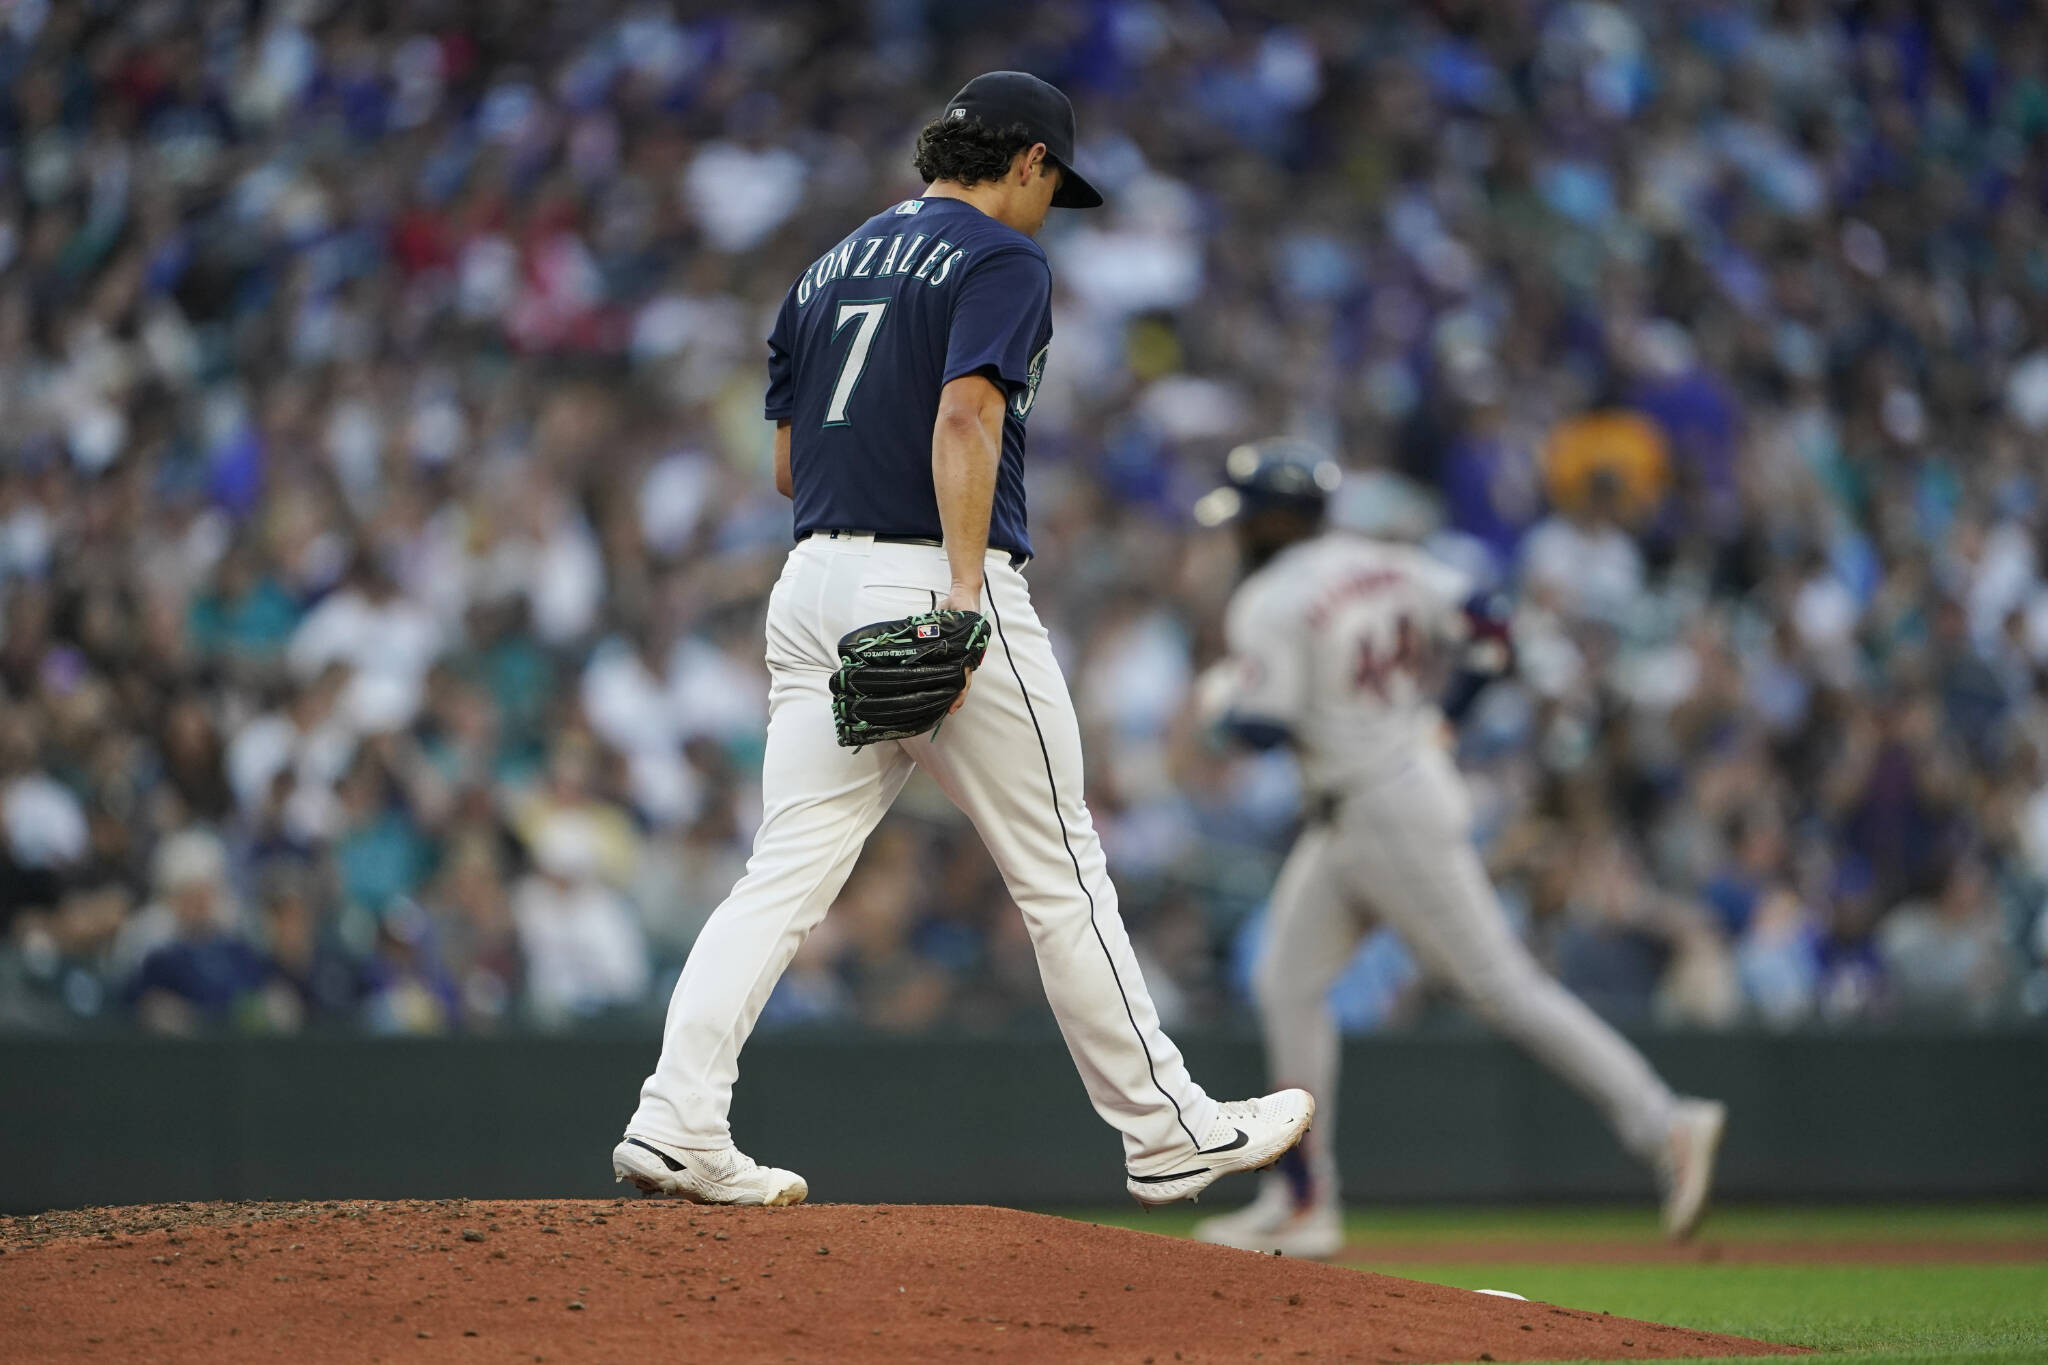 Mariners starting pitcher Marco Gonzales (7) stands on the mound as the Astros’ Yordan Alvarez rounds the bases after hitting a solo home run during the fourth inning of a game Friday in Seattle. (AP Photo/Ted S. Warren)